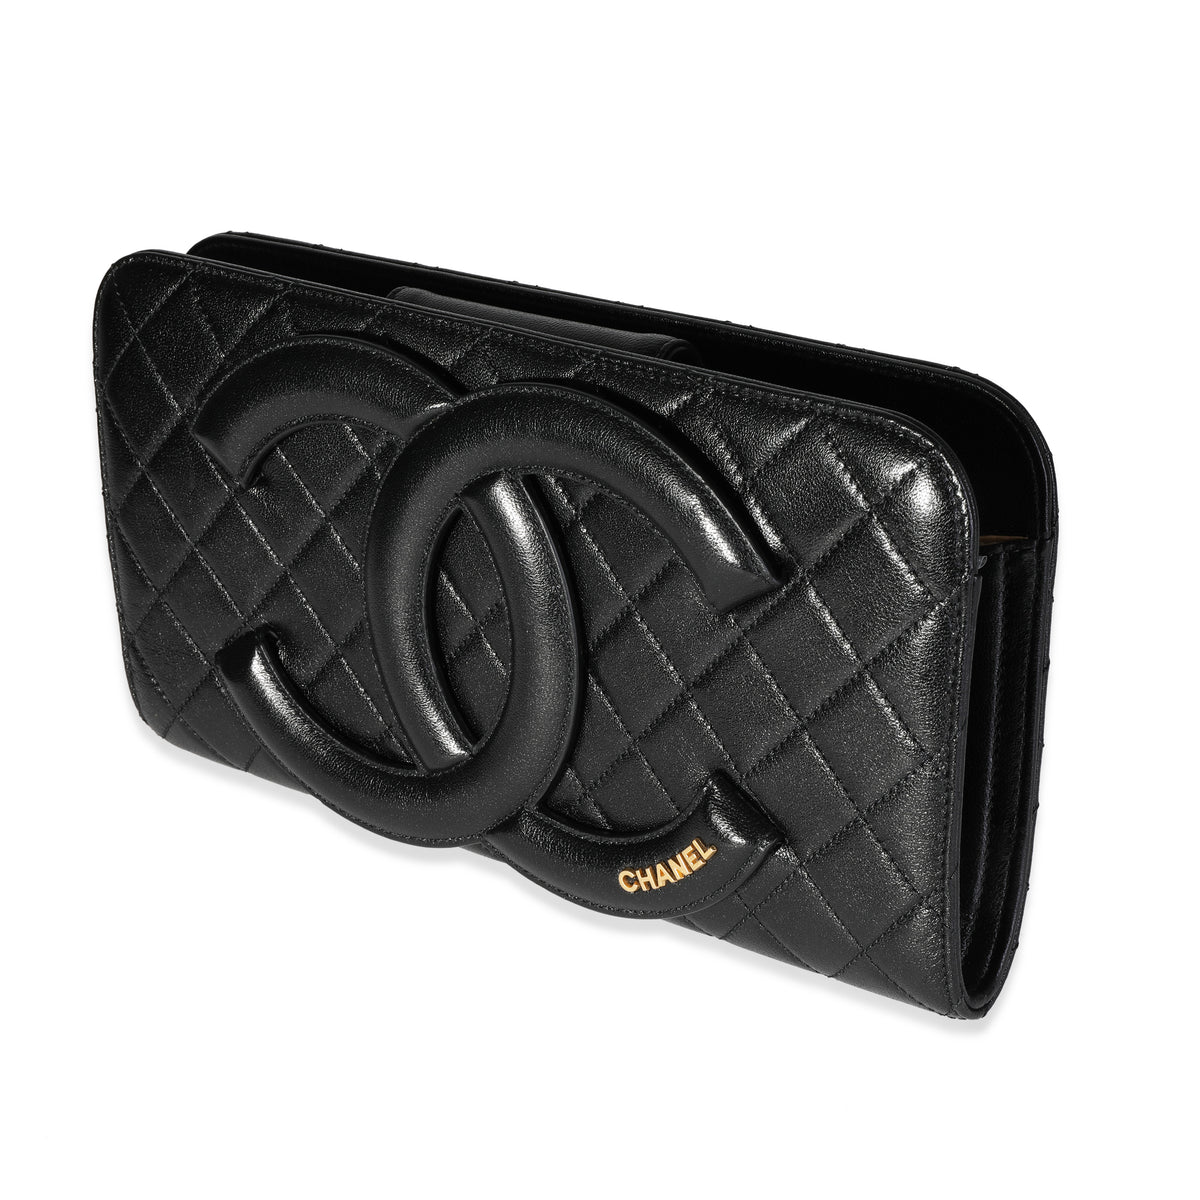 CHANEL Lambskin Quilted Coco Midnight Clutch Black | FASHIONPHILE